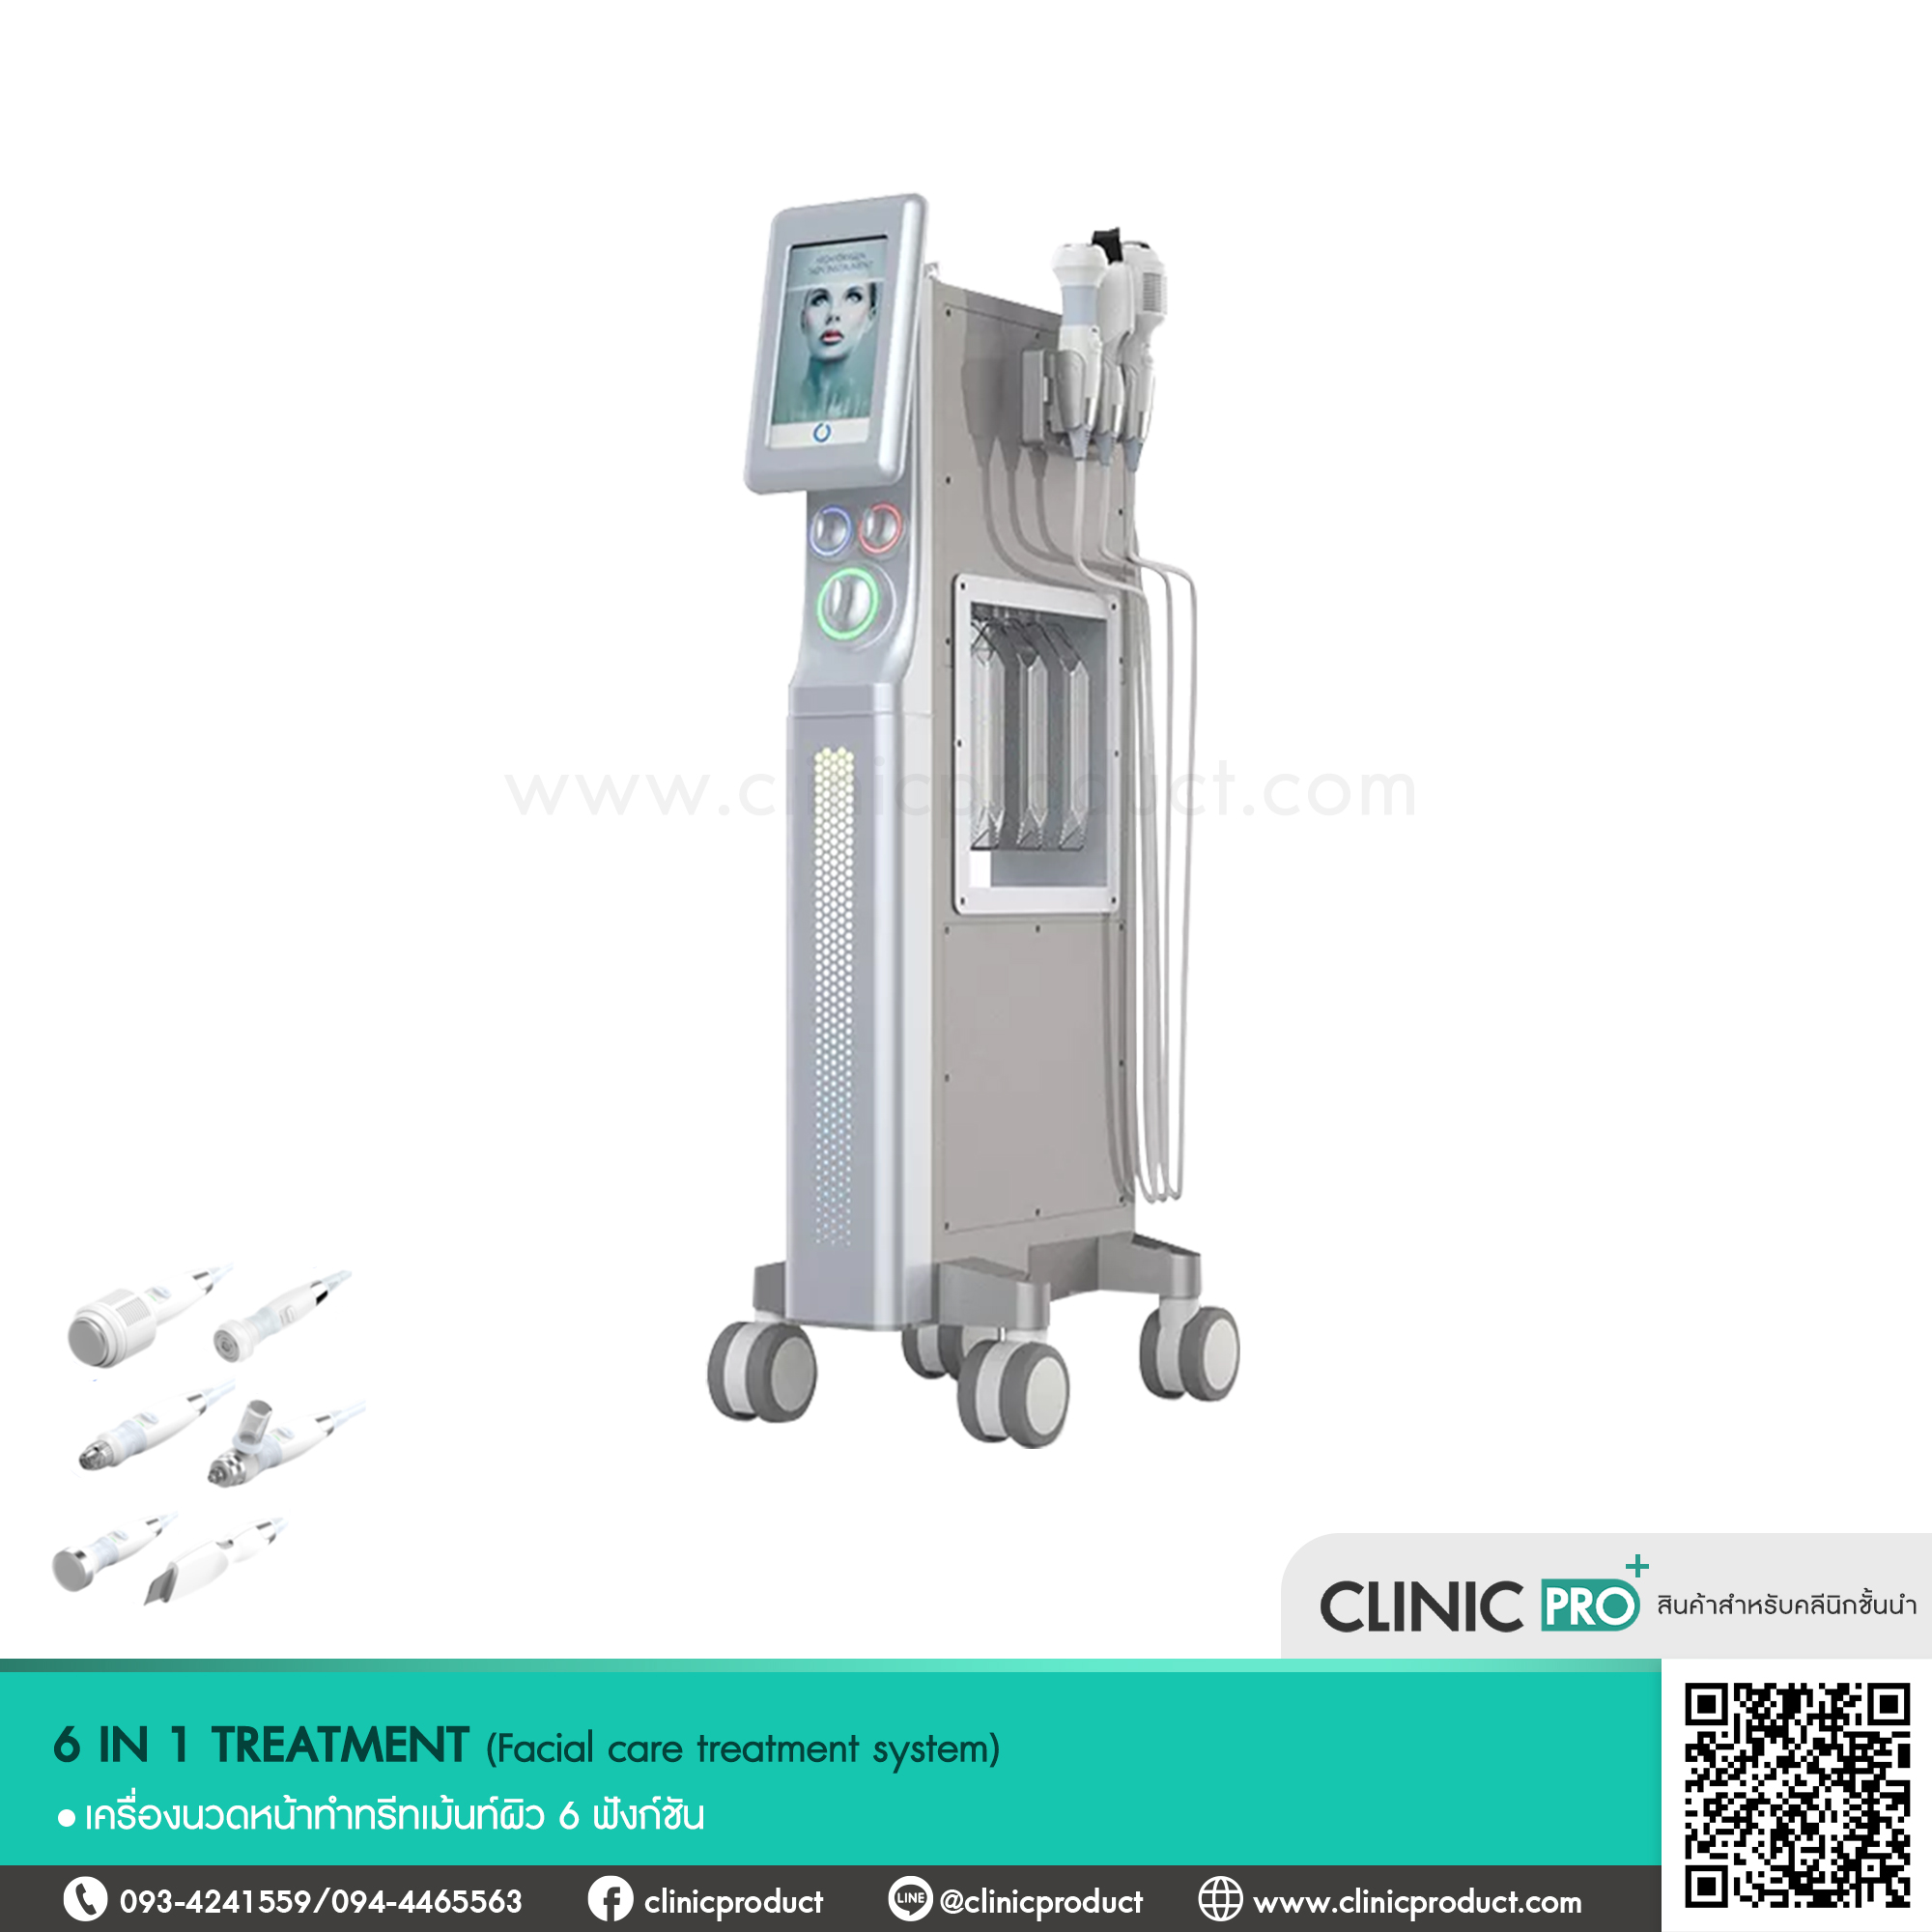 6 IN 1 TREATMENT ( FACIAL CARE TREATMENT SYSTEM )